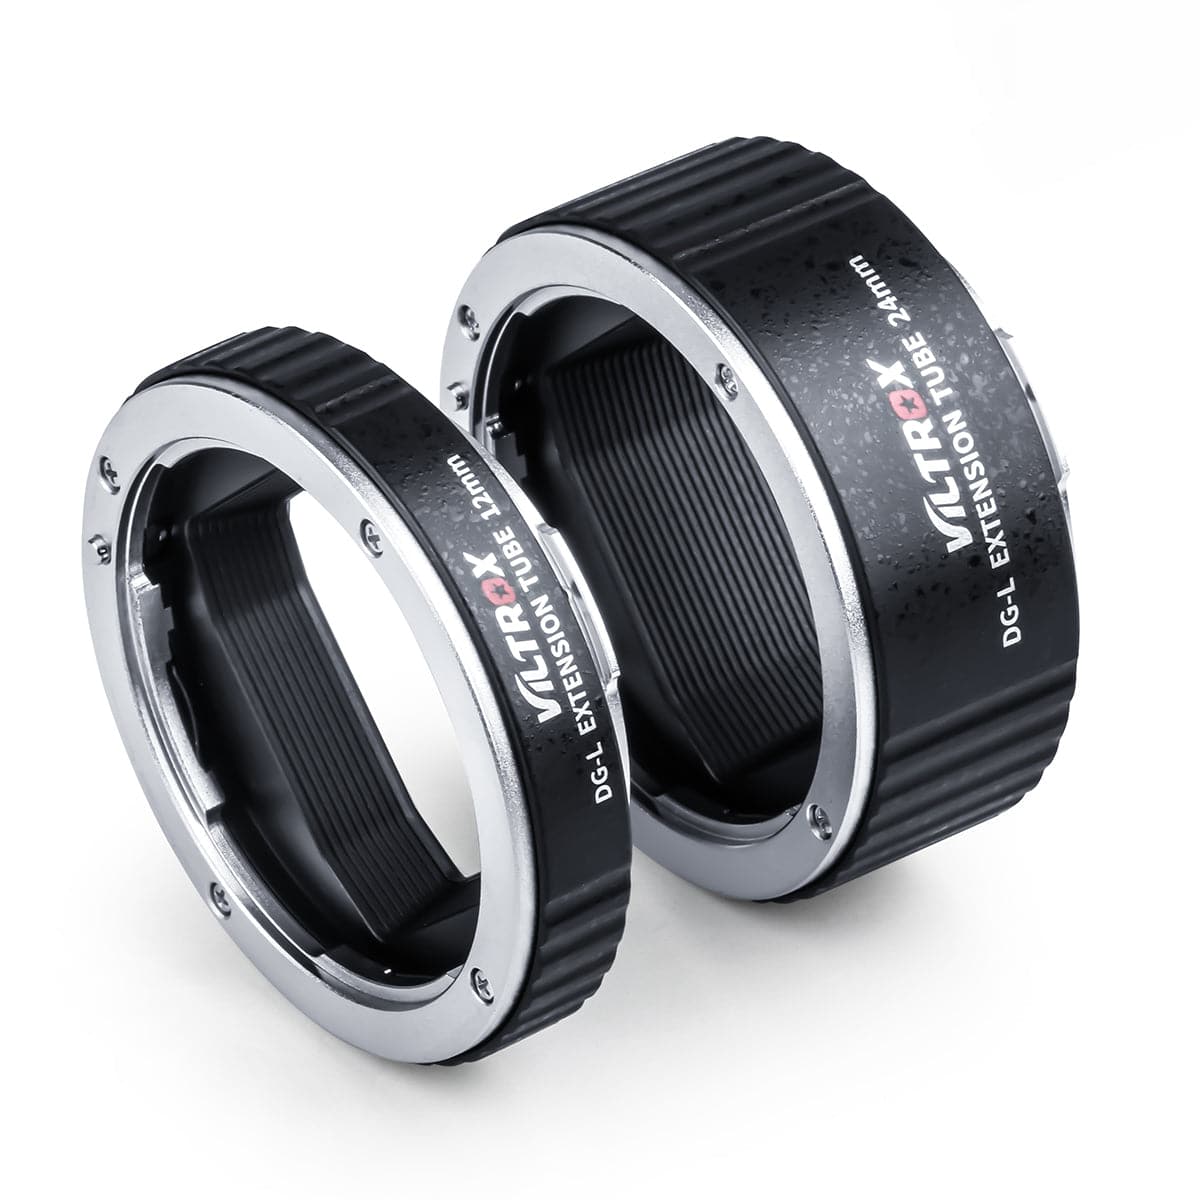 Viltrox DG-L Macro Extension Tube Ring Match with Panasonic Leica Sigma L-mount Cameras